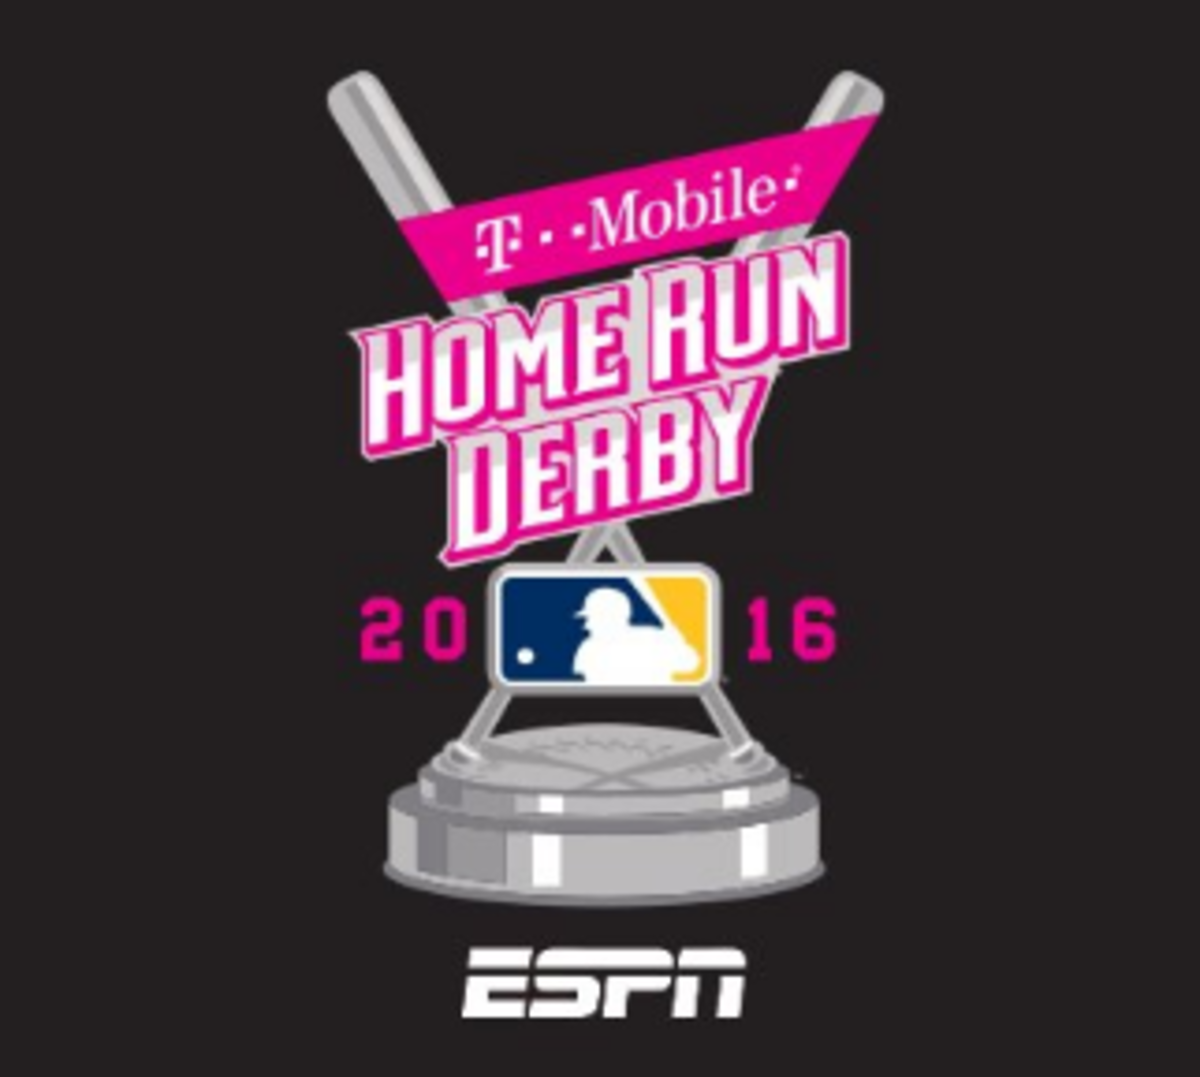 Promo for the 2016 home run derby on ESPN.